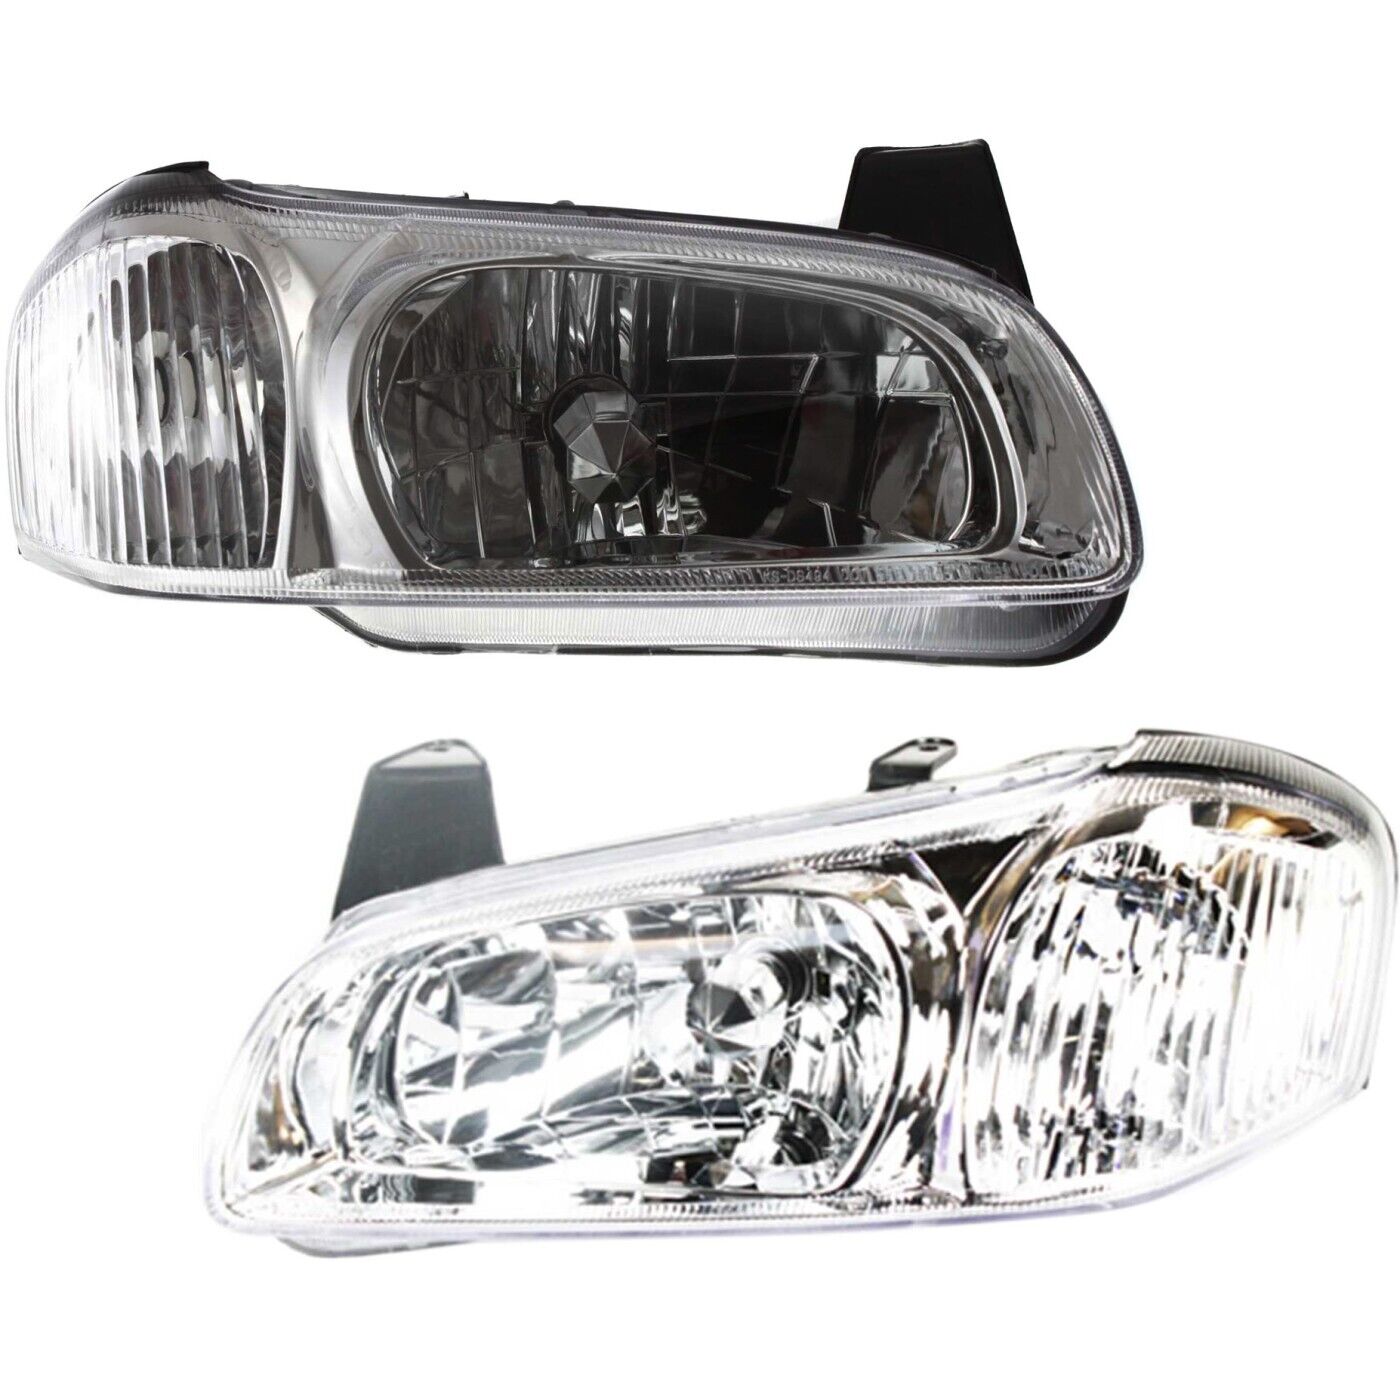 Headlight Set For 2000-2001 Nissan Maxima Left and Right With Bulb 2Pc